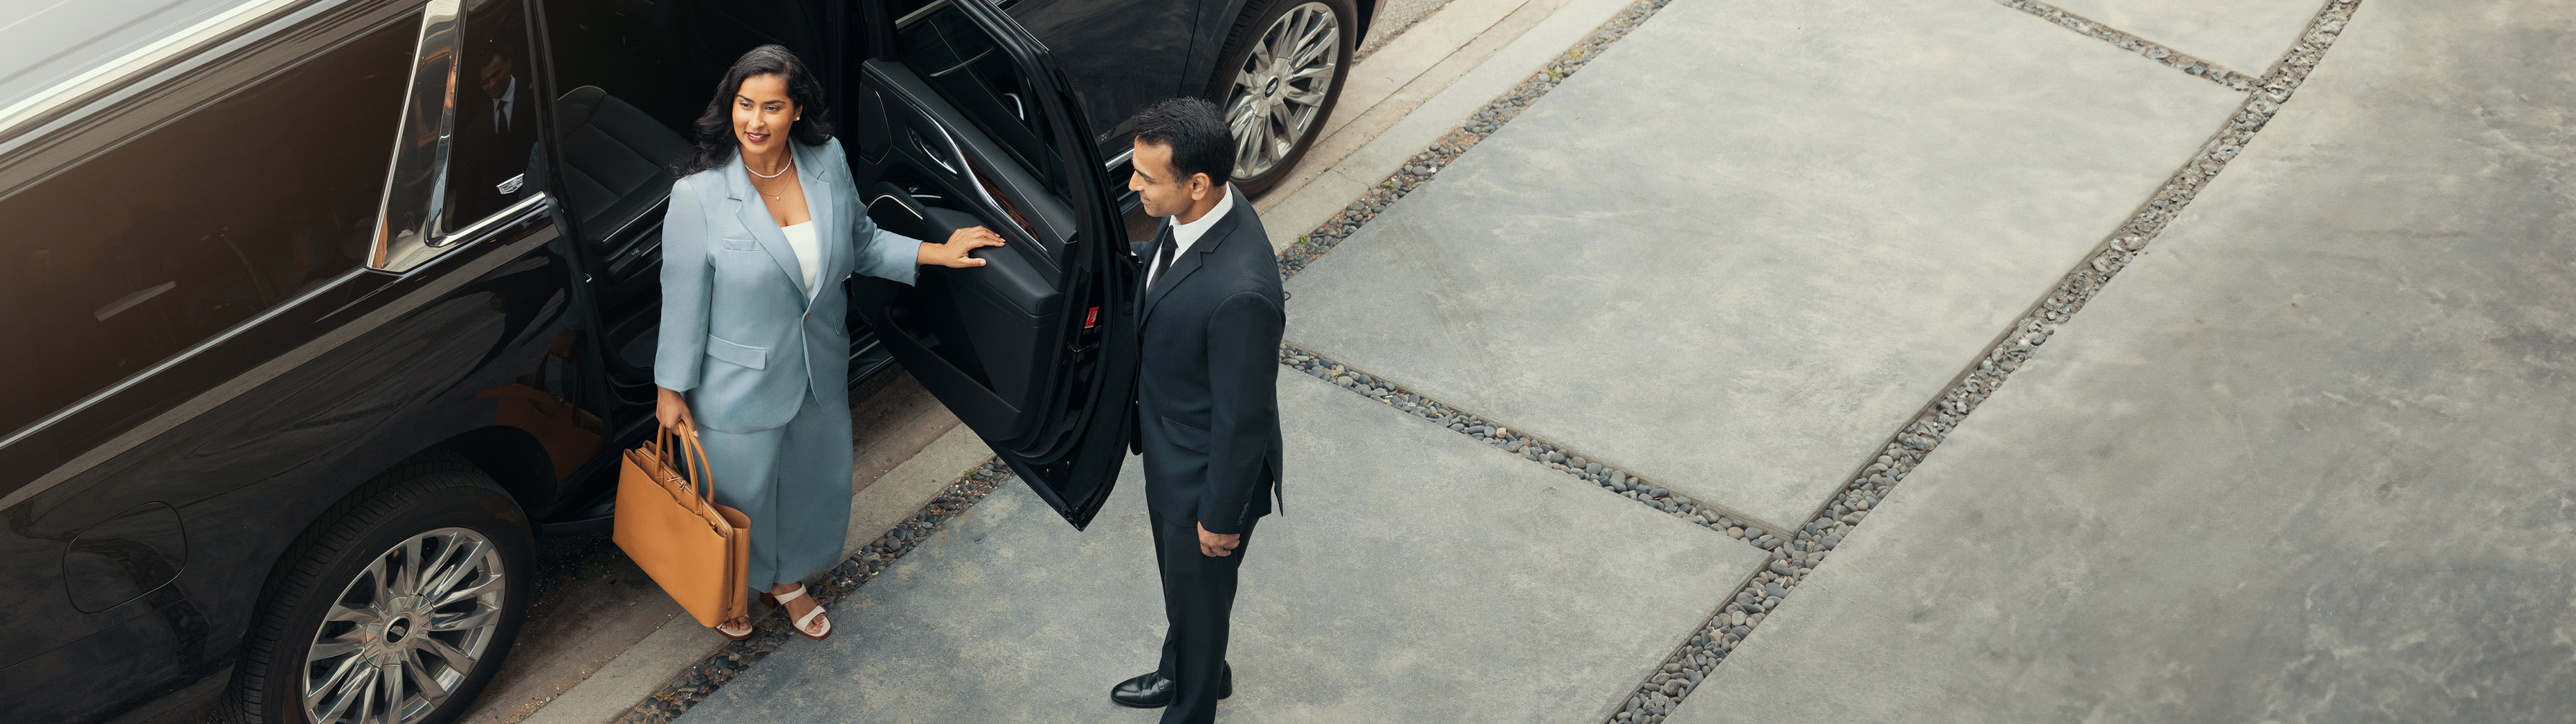 A woman looks around as she emerges from her vehicle, with a chauffeur opening the door.